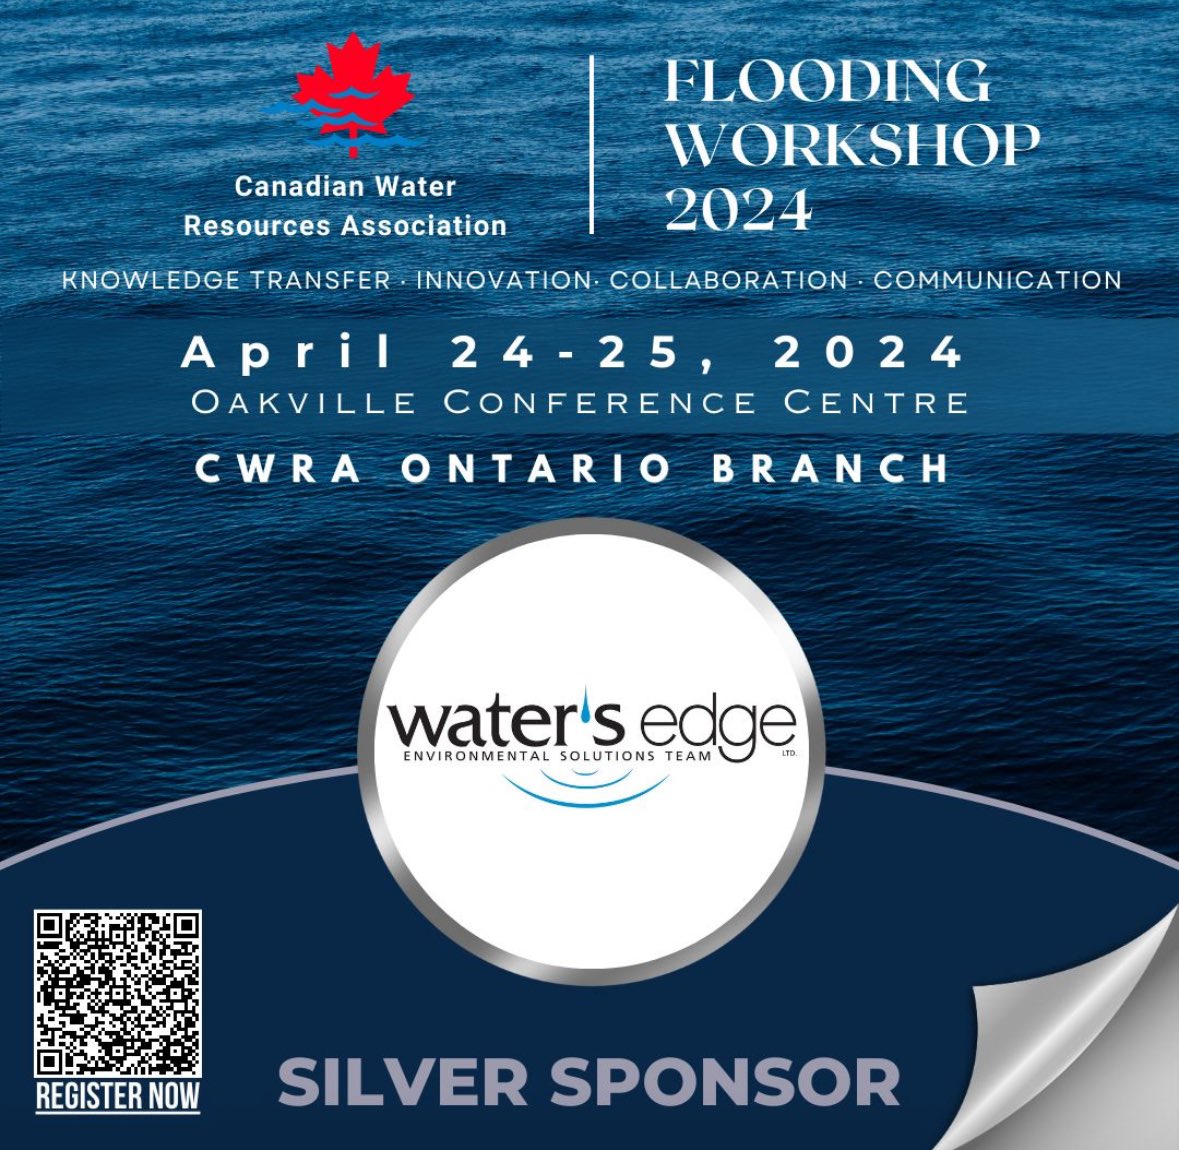 We are thankful to @HoskinSci   and Water's Edge Environmental Solutions Team Ltd.  for their invaluable support as Silver Sponsors of the Ontario Branch Flooding Workshop, happening on April 24-25, 2024.